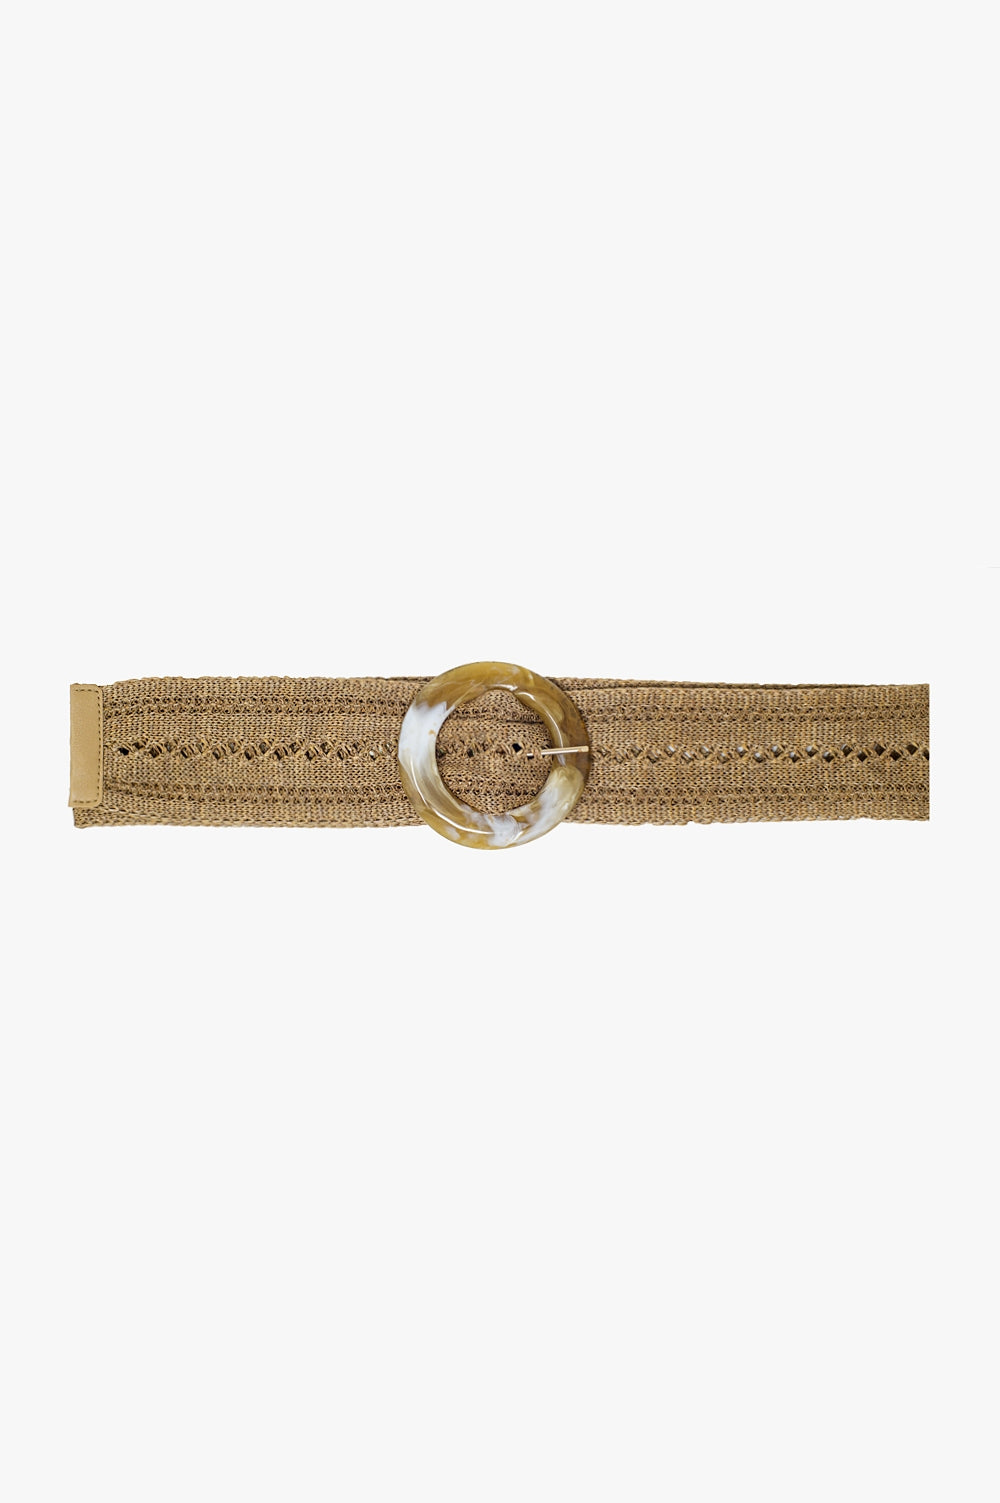 Q2 Beige woven belt with round buckle with marble effect